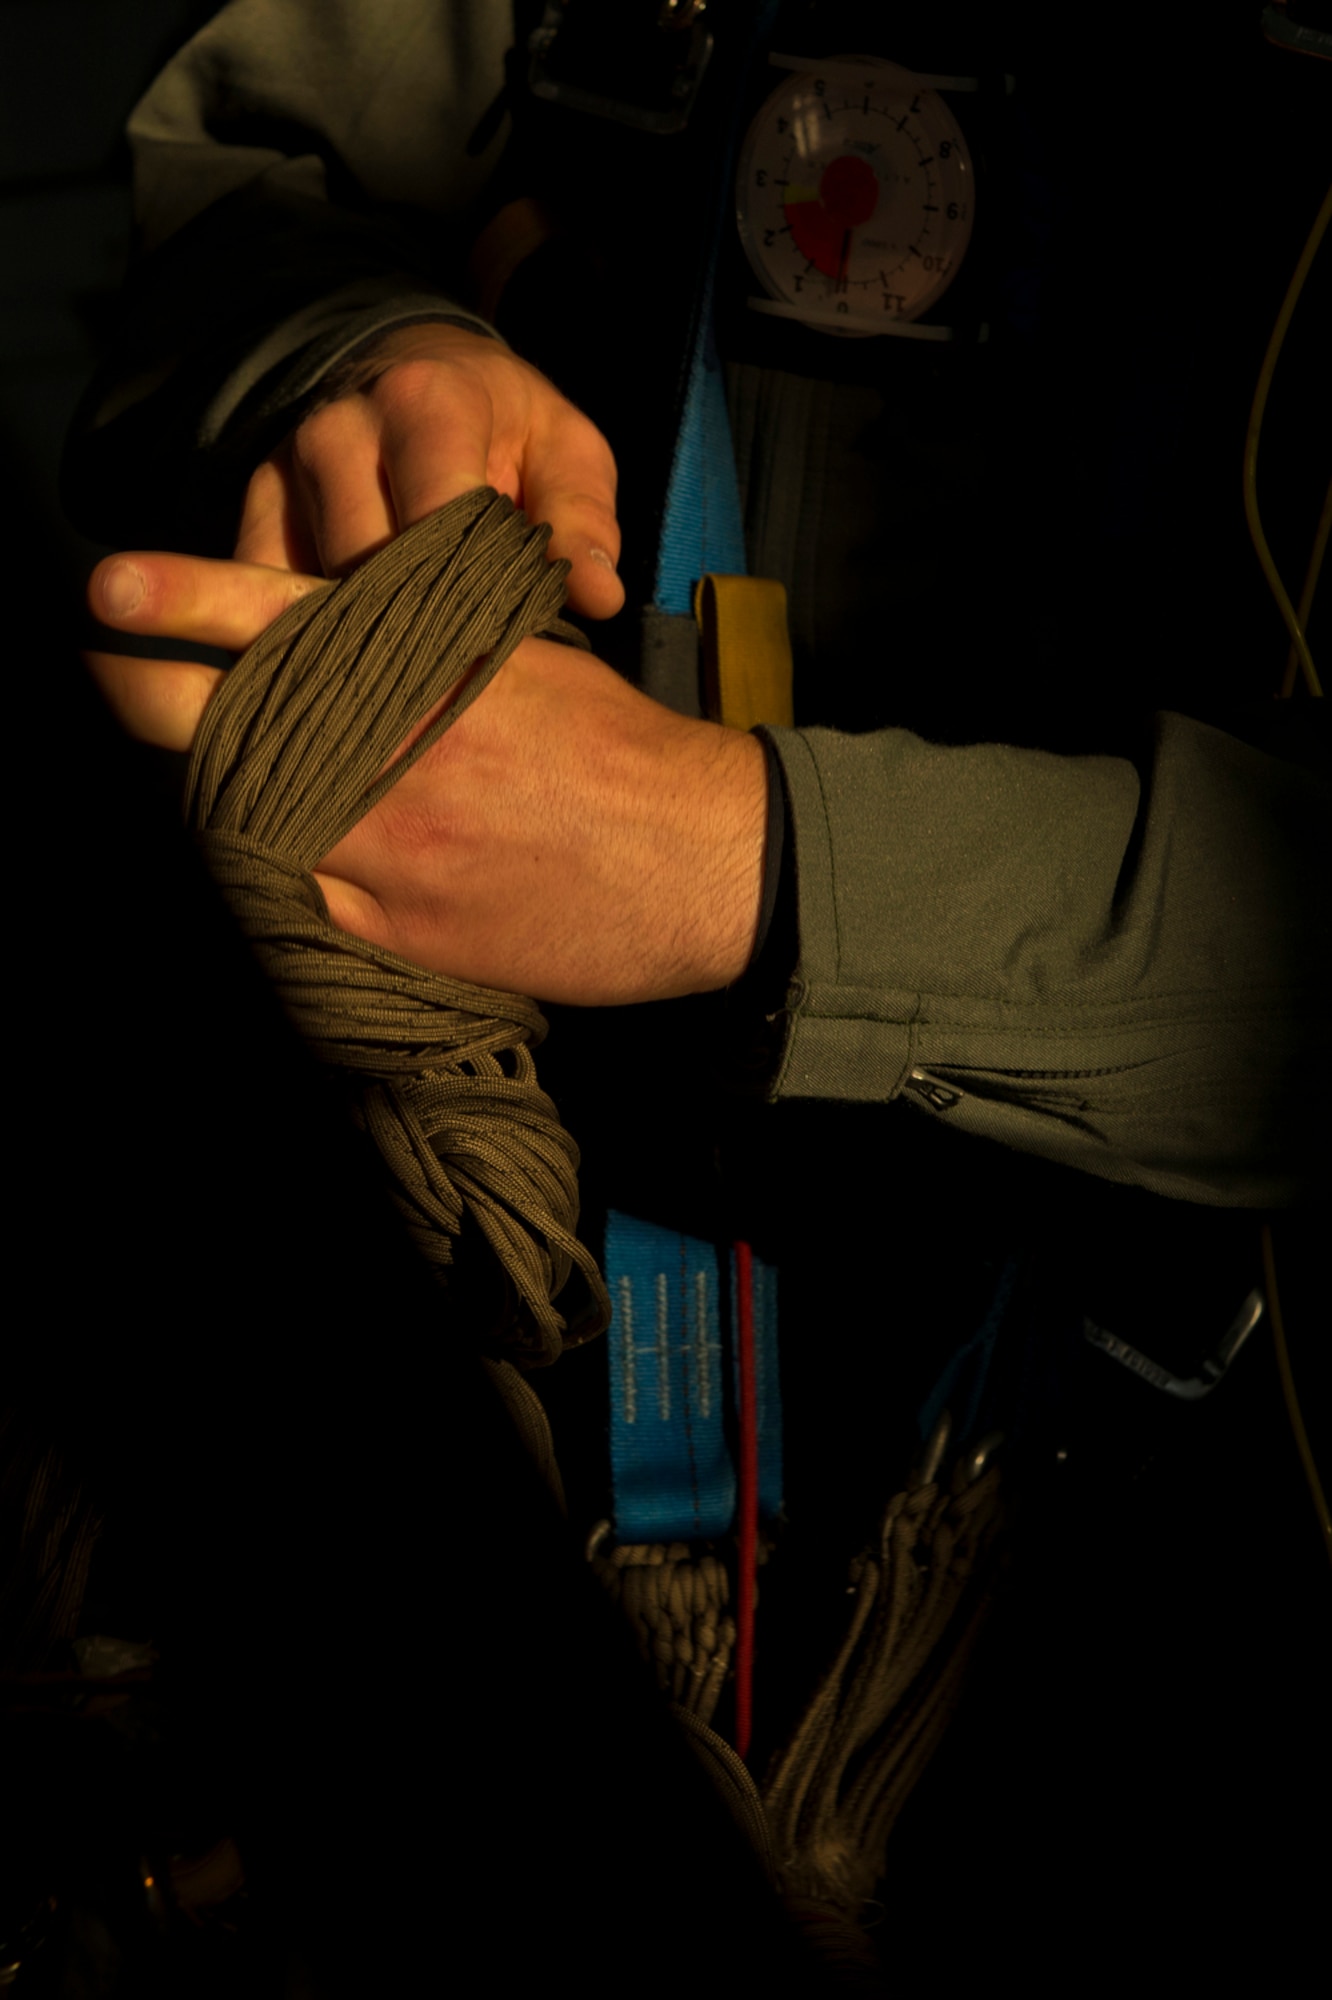 A U.S. Air Force Academy cadet learns to pack and organize parachute cords before a morning jump in the 490 AM program. Cadets learn every aspect of parachuting and are responsible for packing their own gear. (U.S. Air Force photo/Tech. Sgt. Bennie J. Davis III)